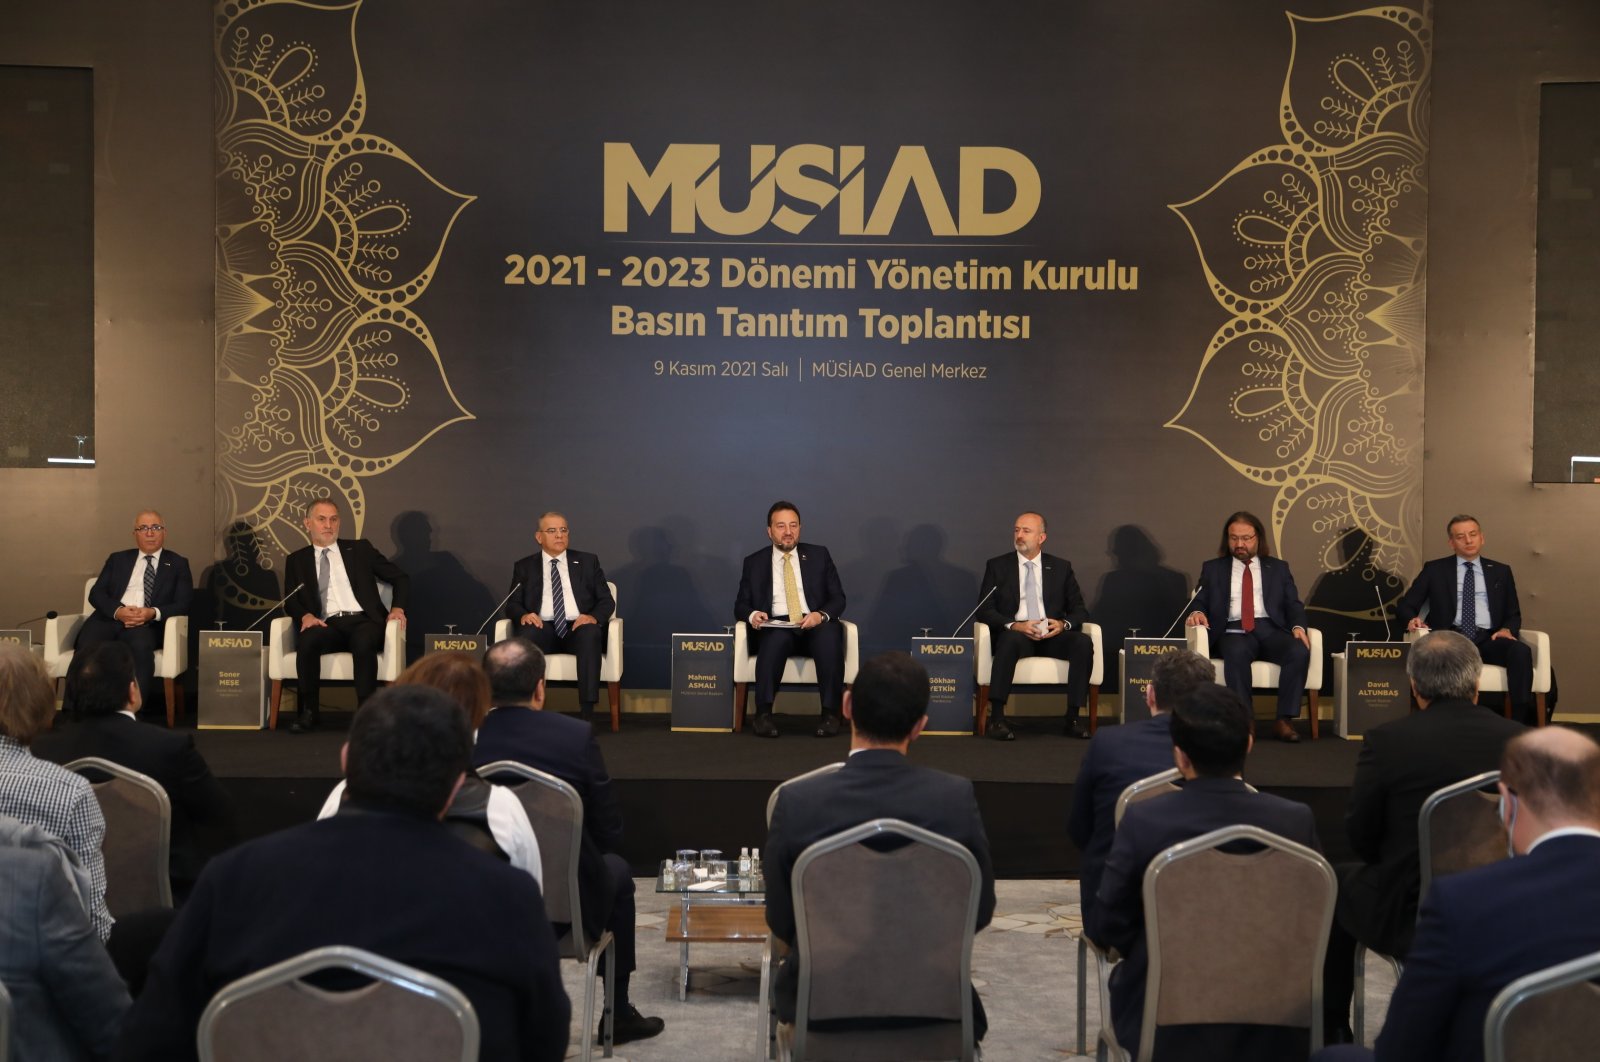 Mahmut Asmalı (C), the newly elected chairperson of the Independent Industrialists and Businesspersons Association's (MÜSIAD), and other members of the board during a press meeting in Istanbul, Turkey, Nov. 9, 2021. (Courtesy of MÜSIAD)